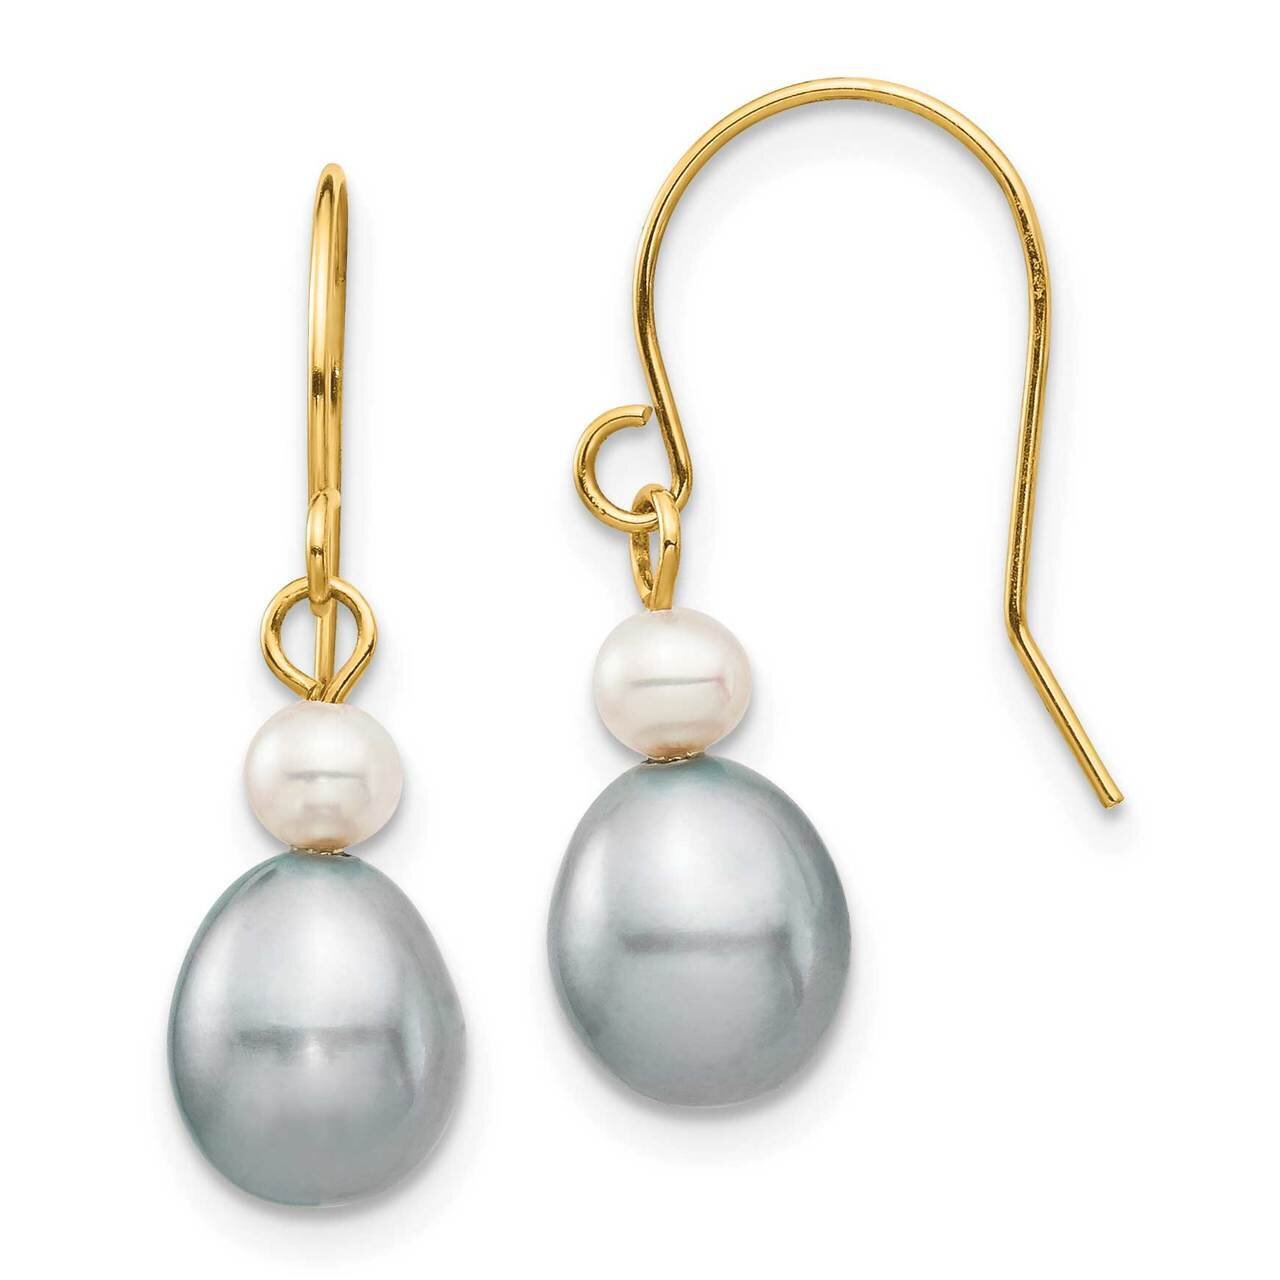 4-7mm White/Grey Round/Rice Freshwater Cultured Pearl Dangle Earrings 14k Gold XF709E